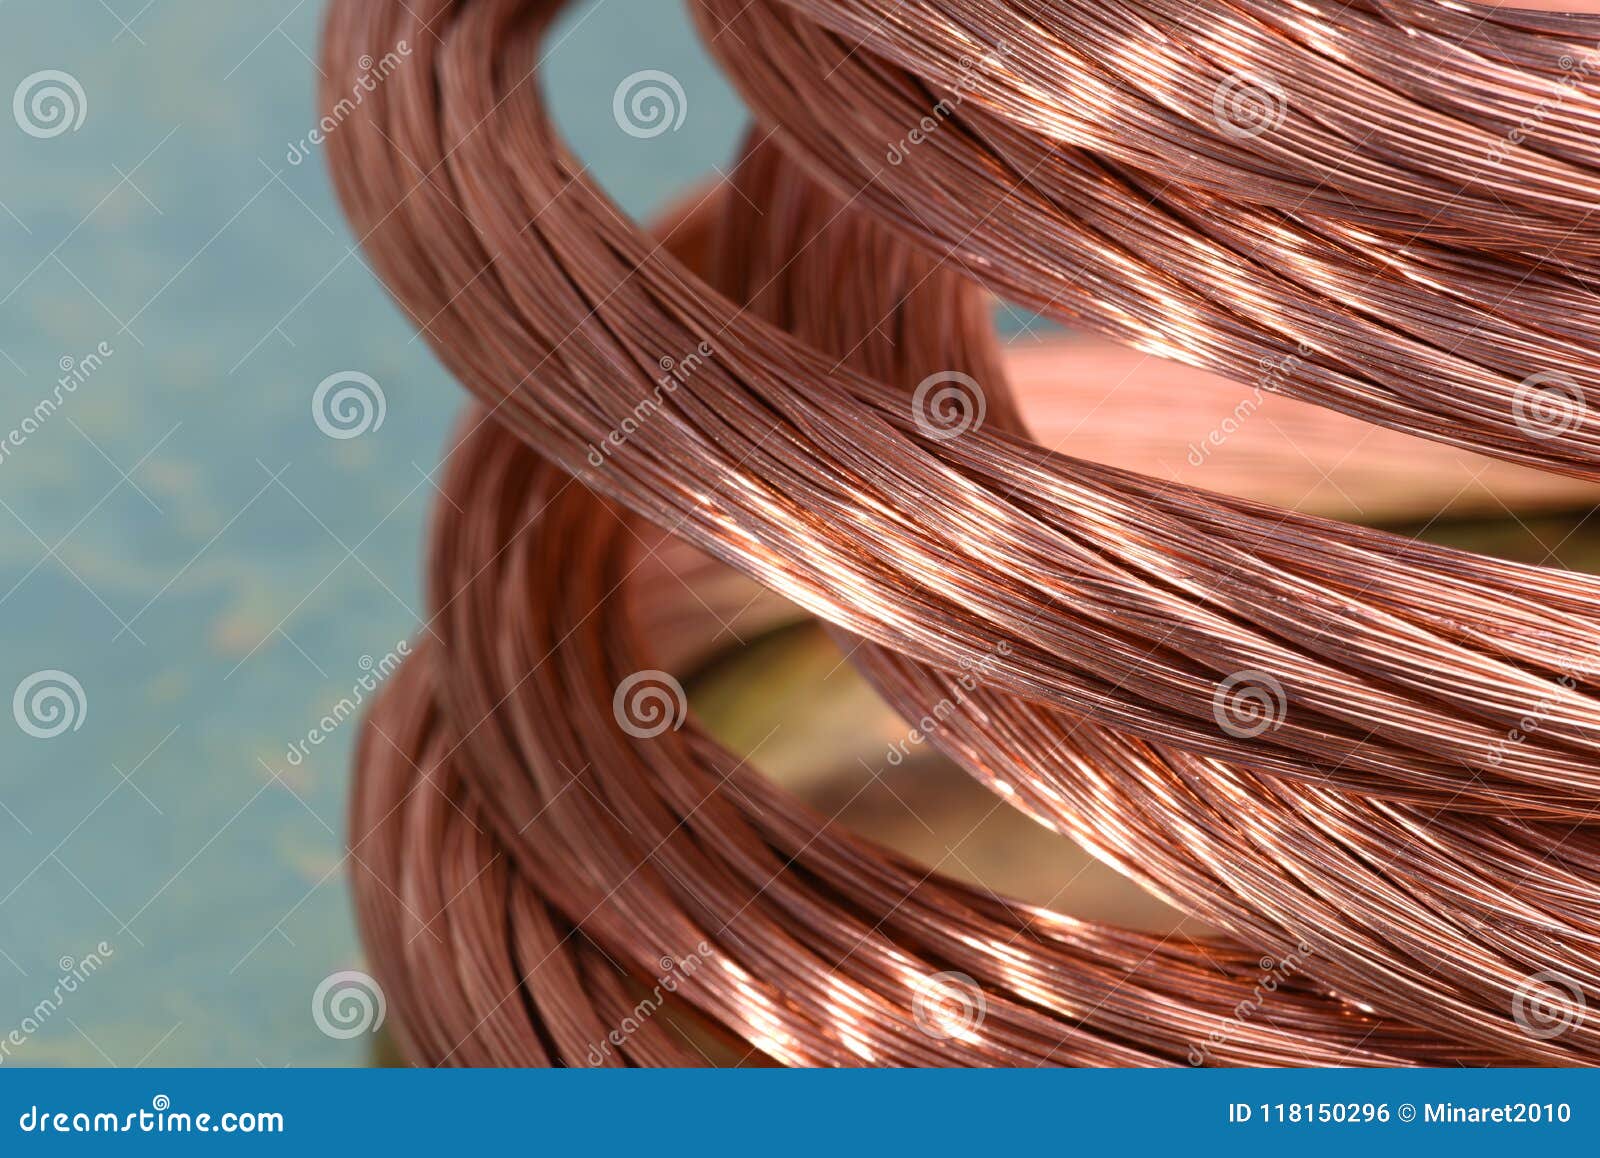 copper wire, concept of industry of raw materials